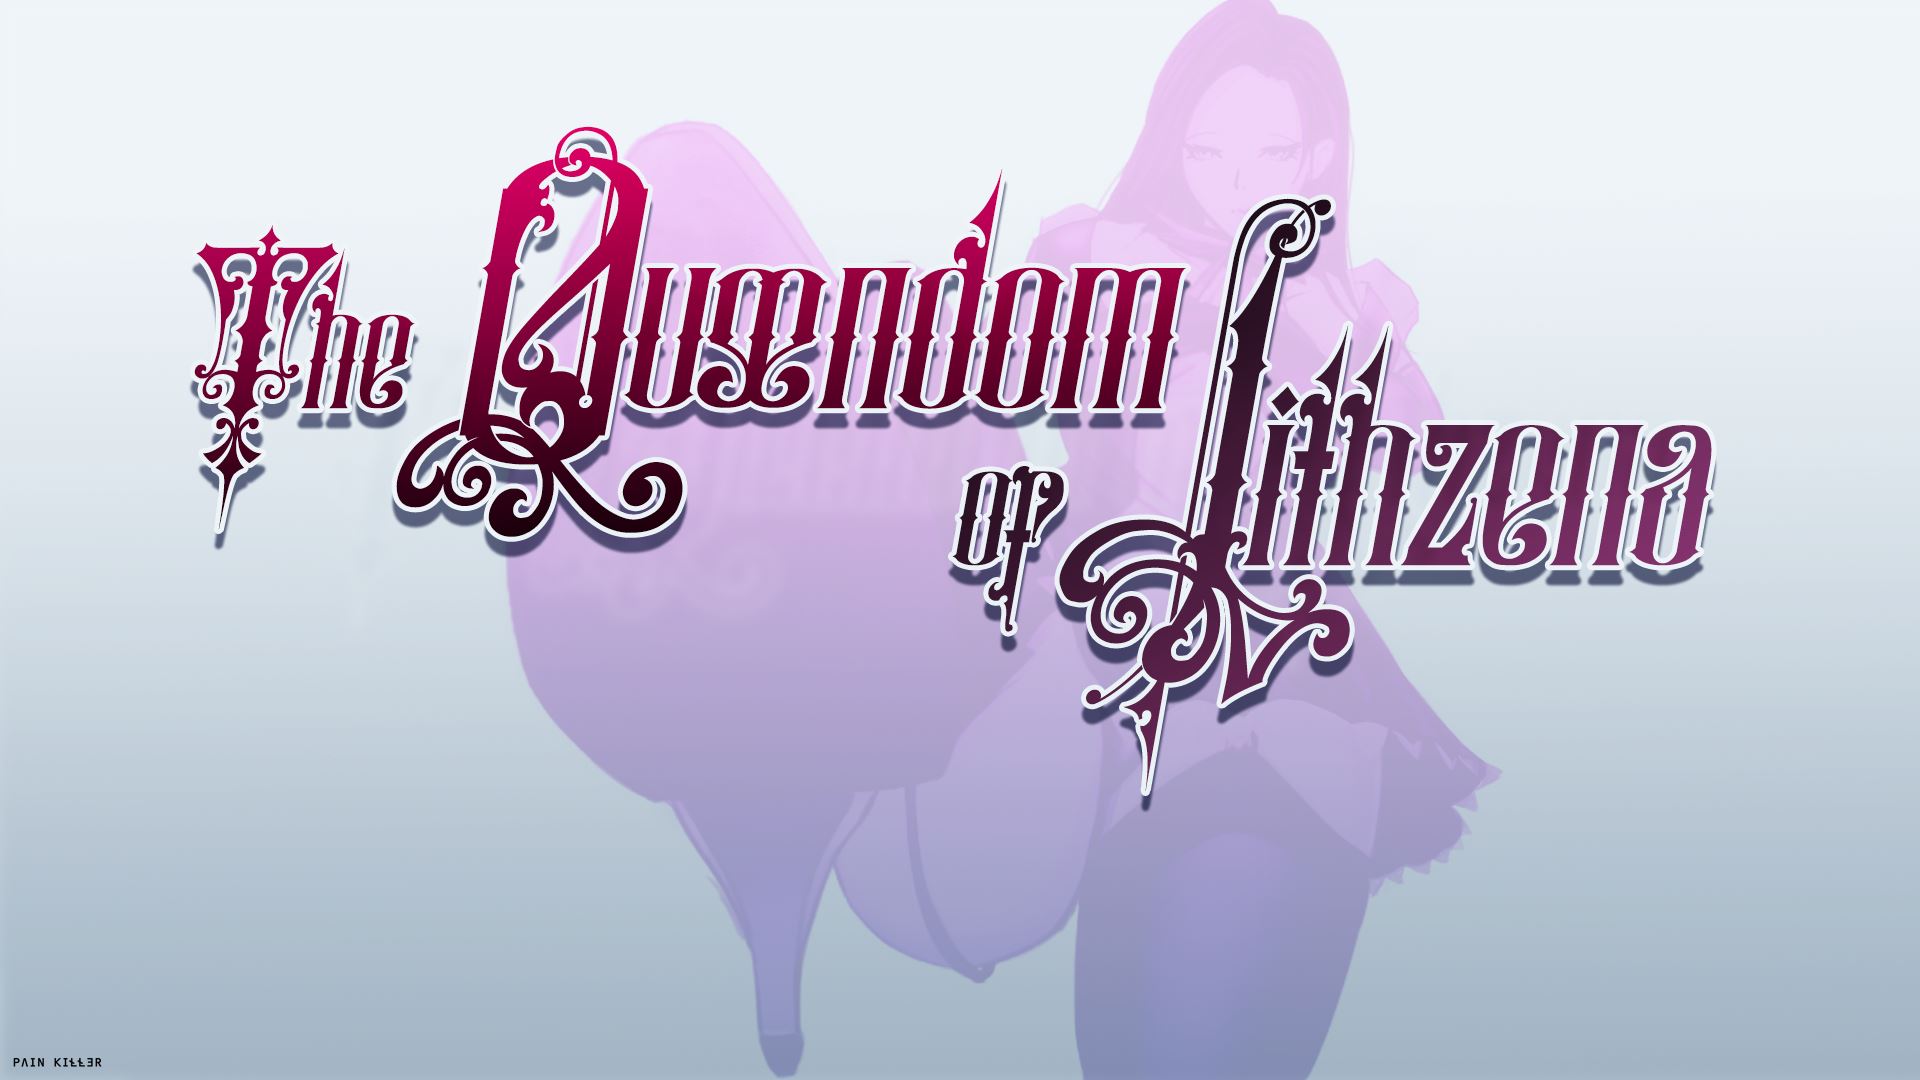 The Queendom of Lithzena porn xxx game download cover